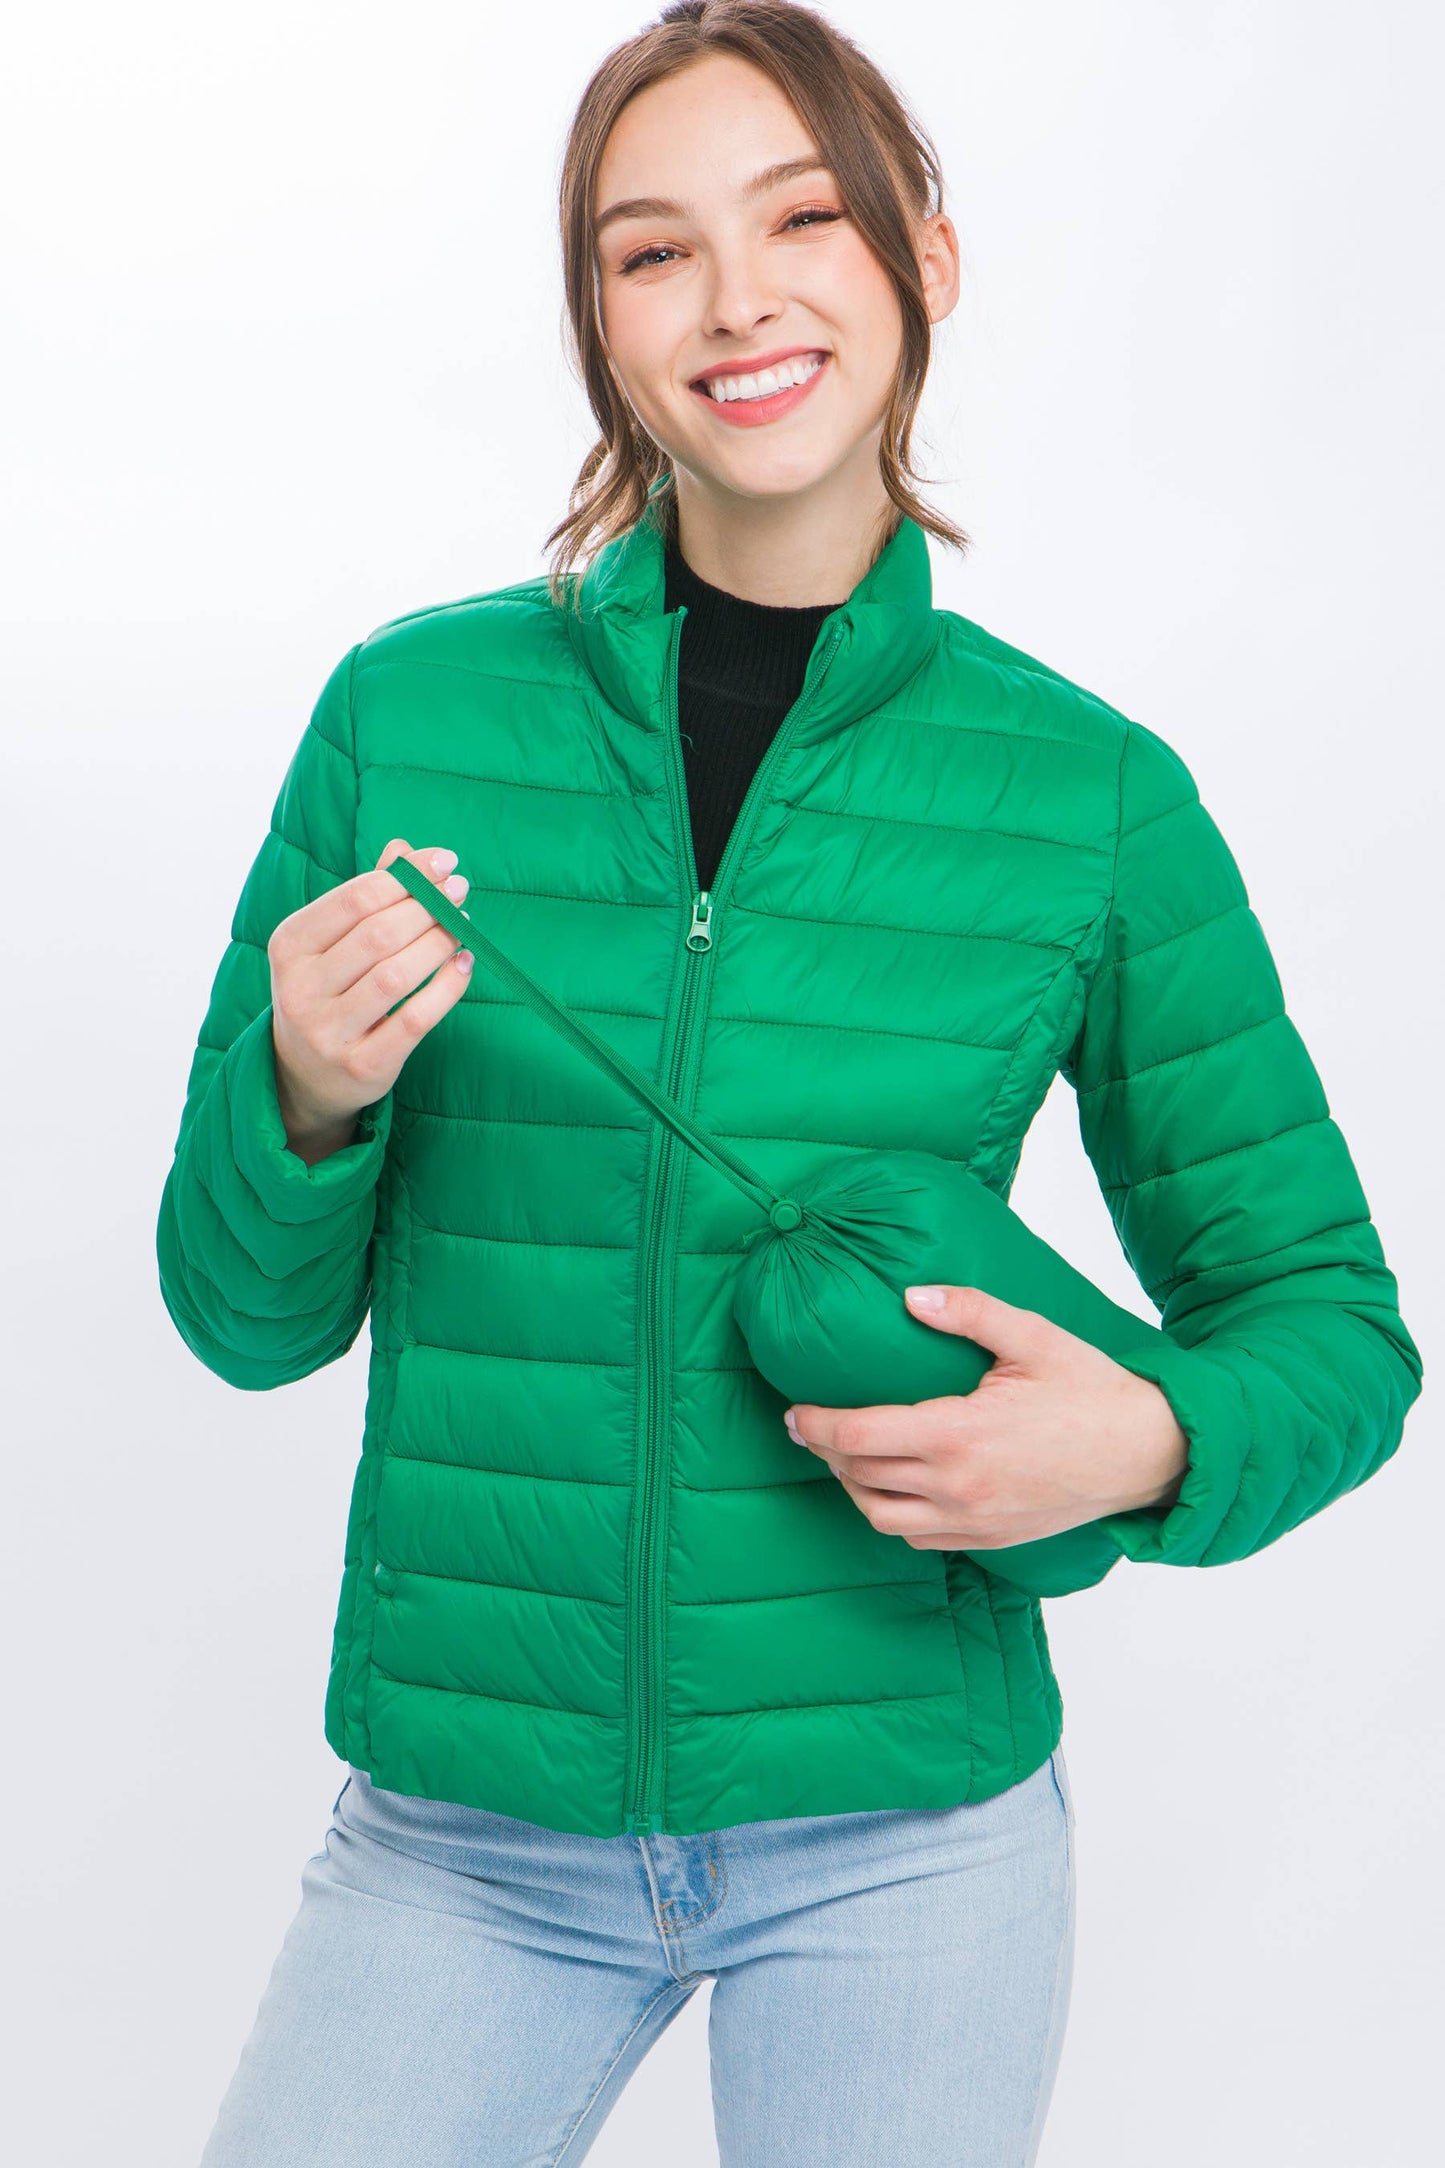 Christmas Ultra Lightweight Padded Thermal Zip Up Jacket: GREEN-160404 / S